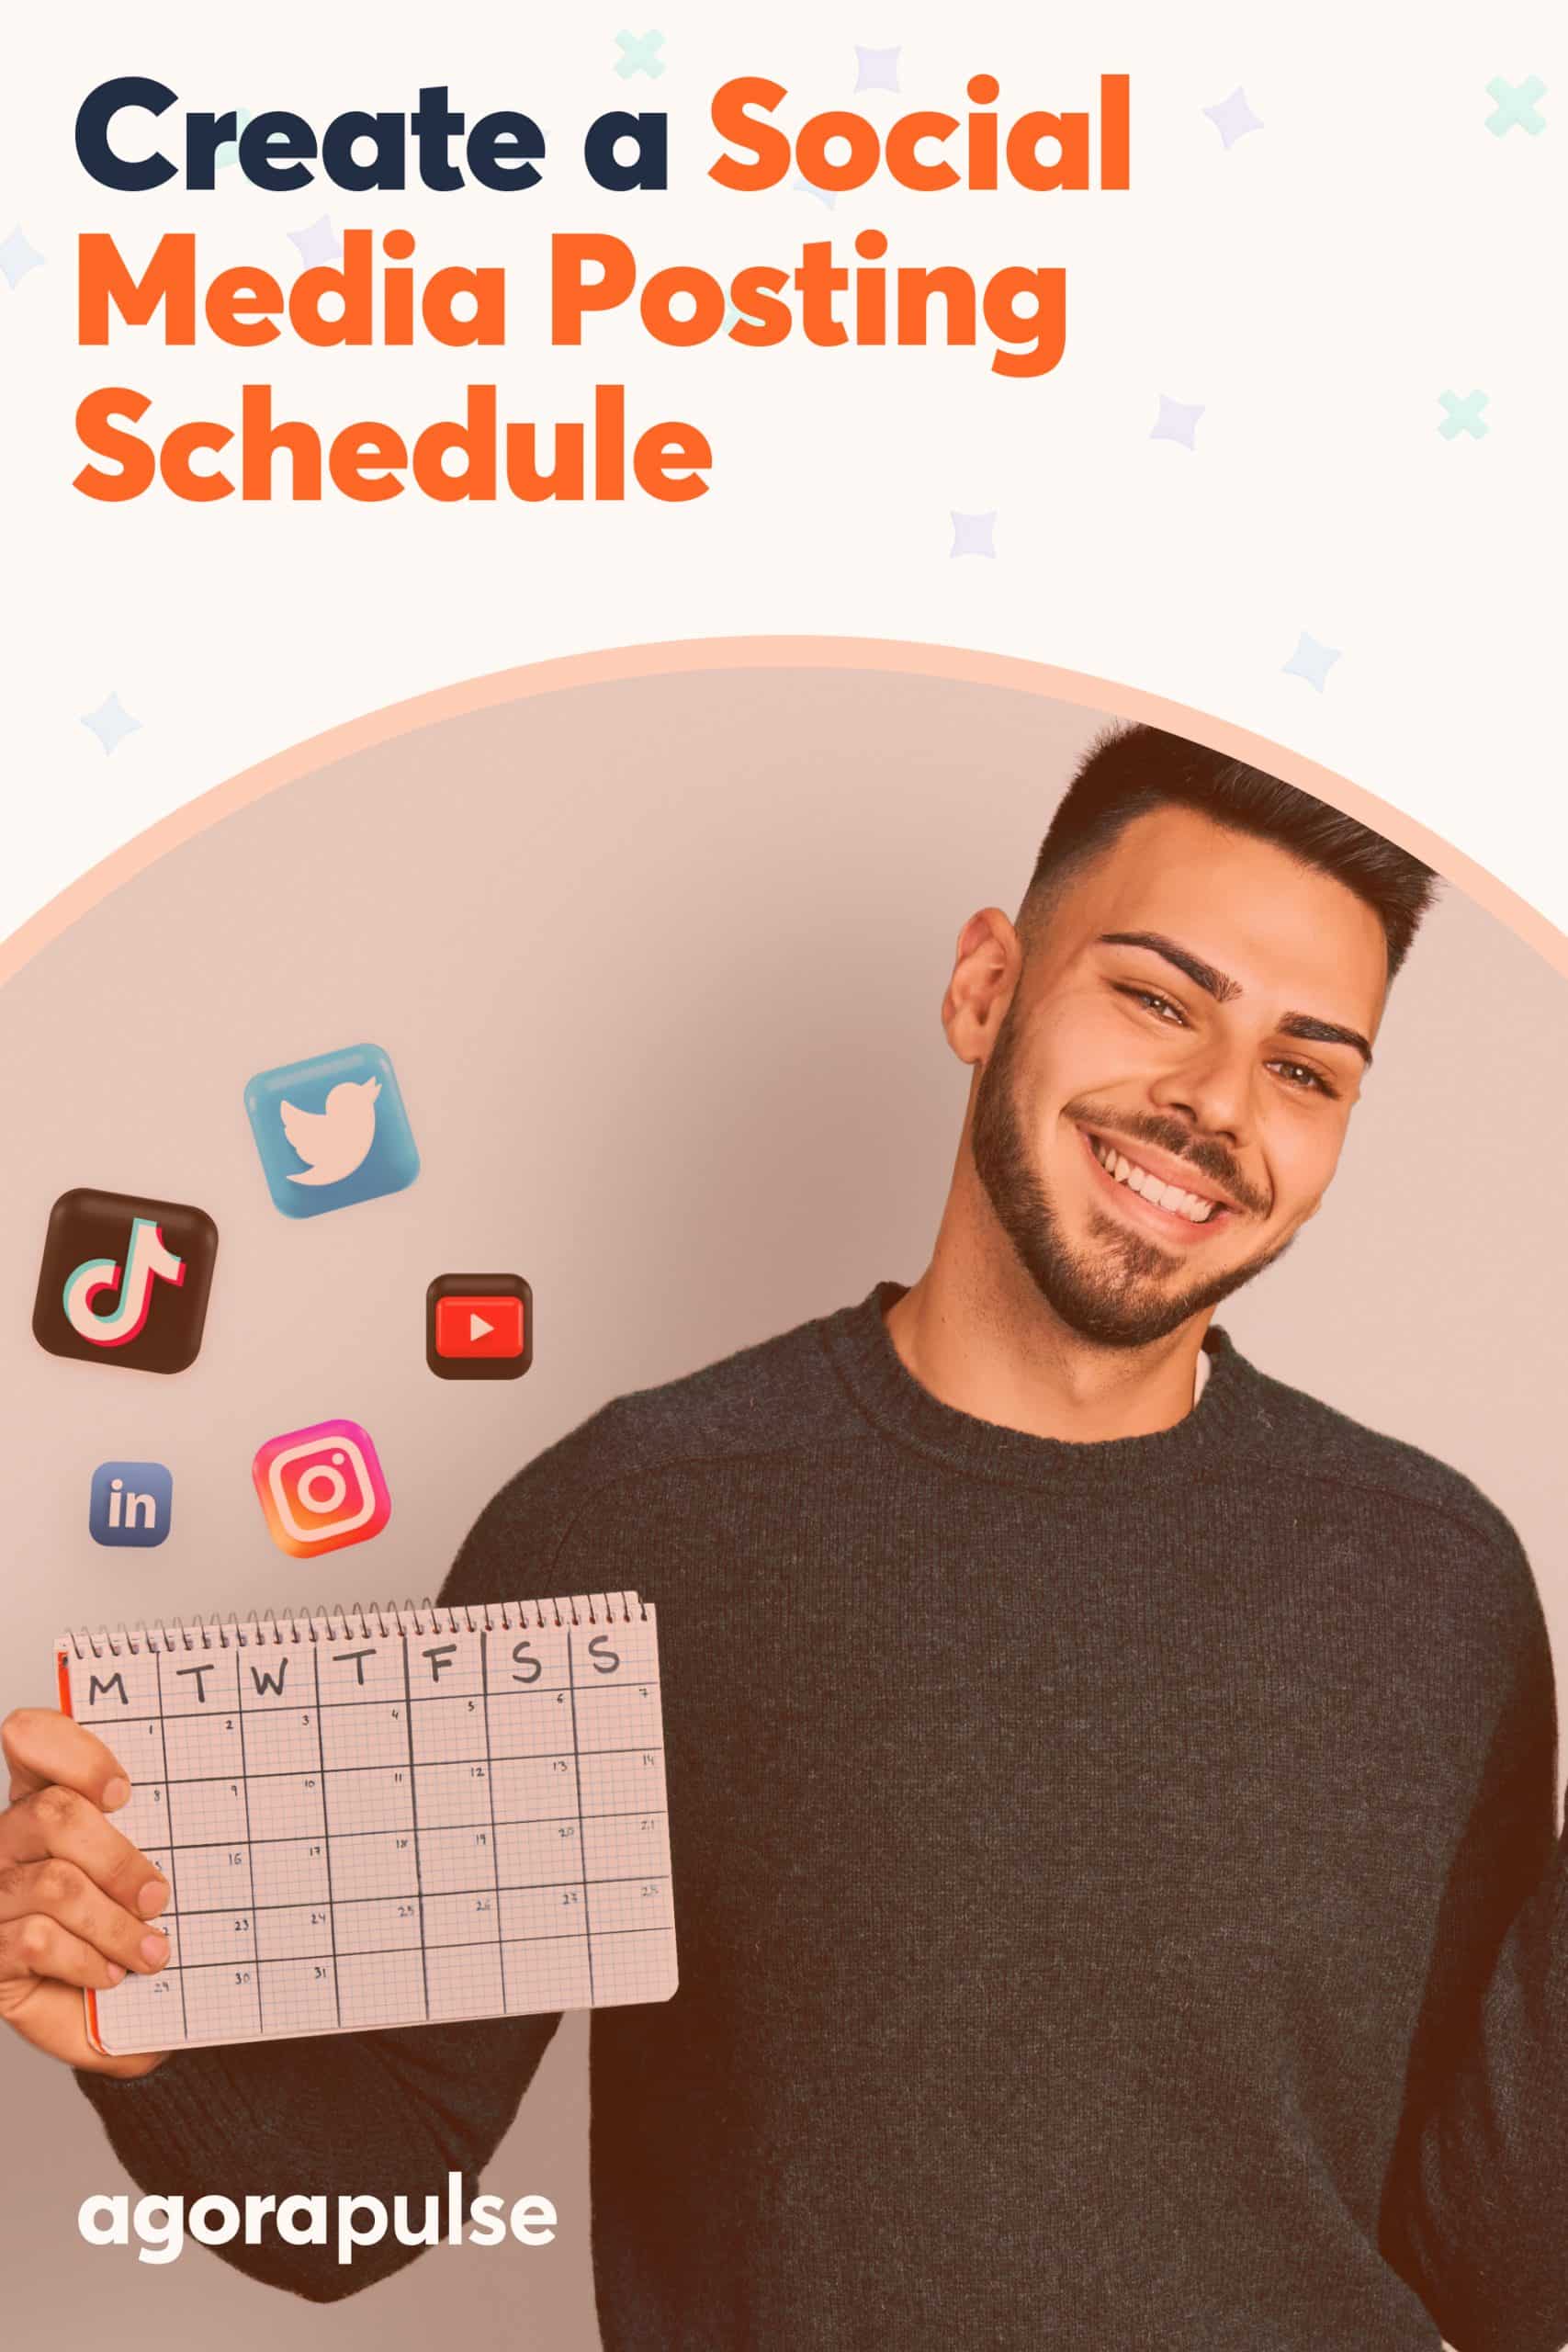 Master Individual and Group Posting for Improved Social Media Scheduling